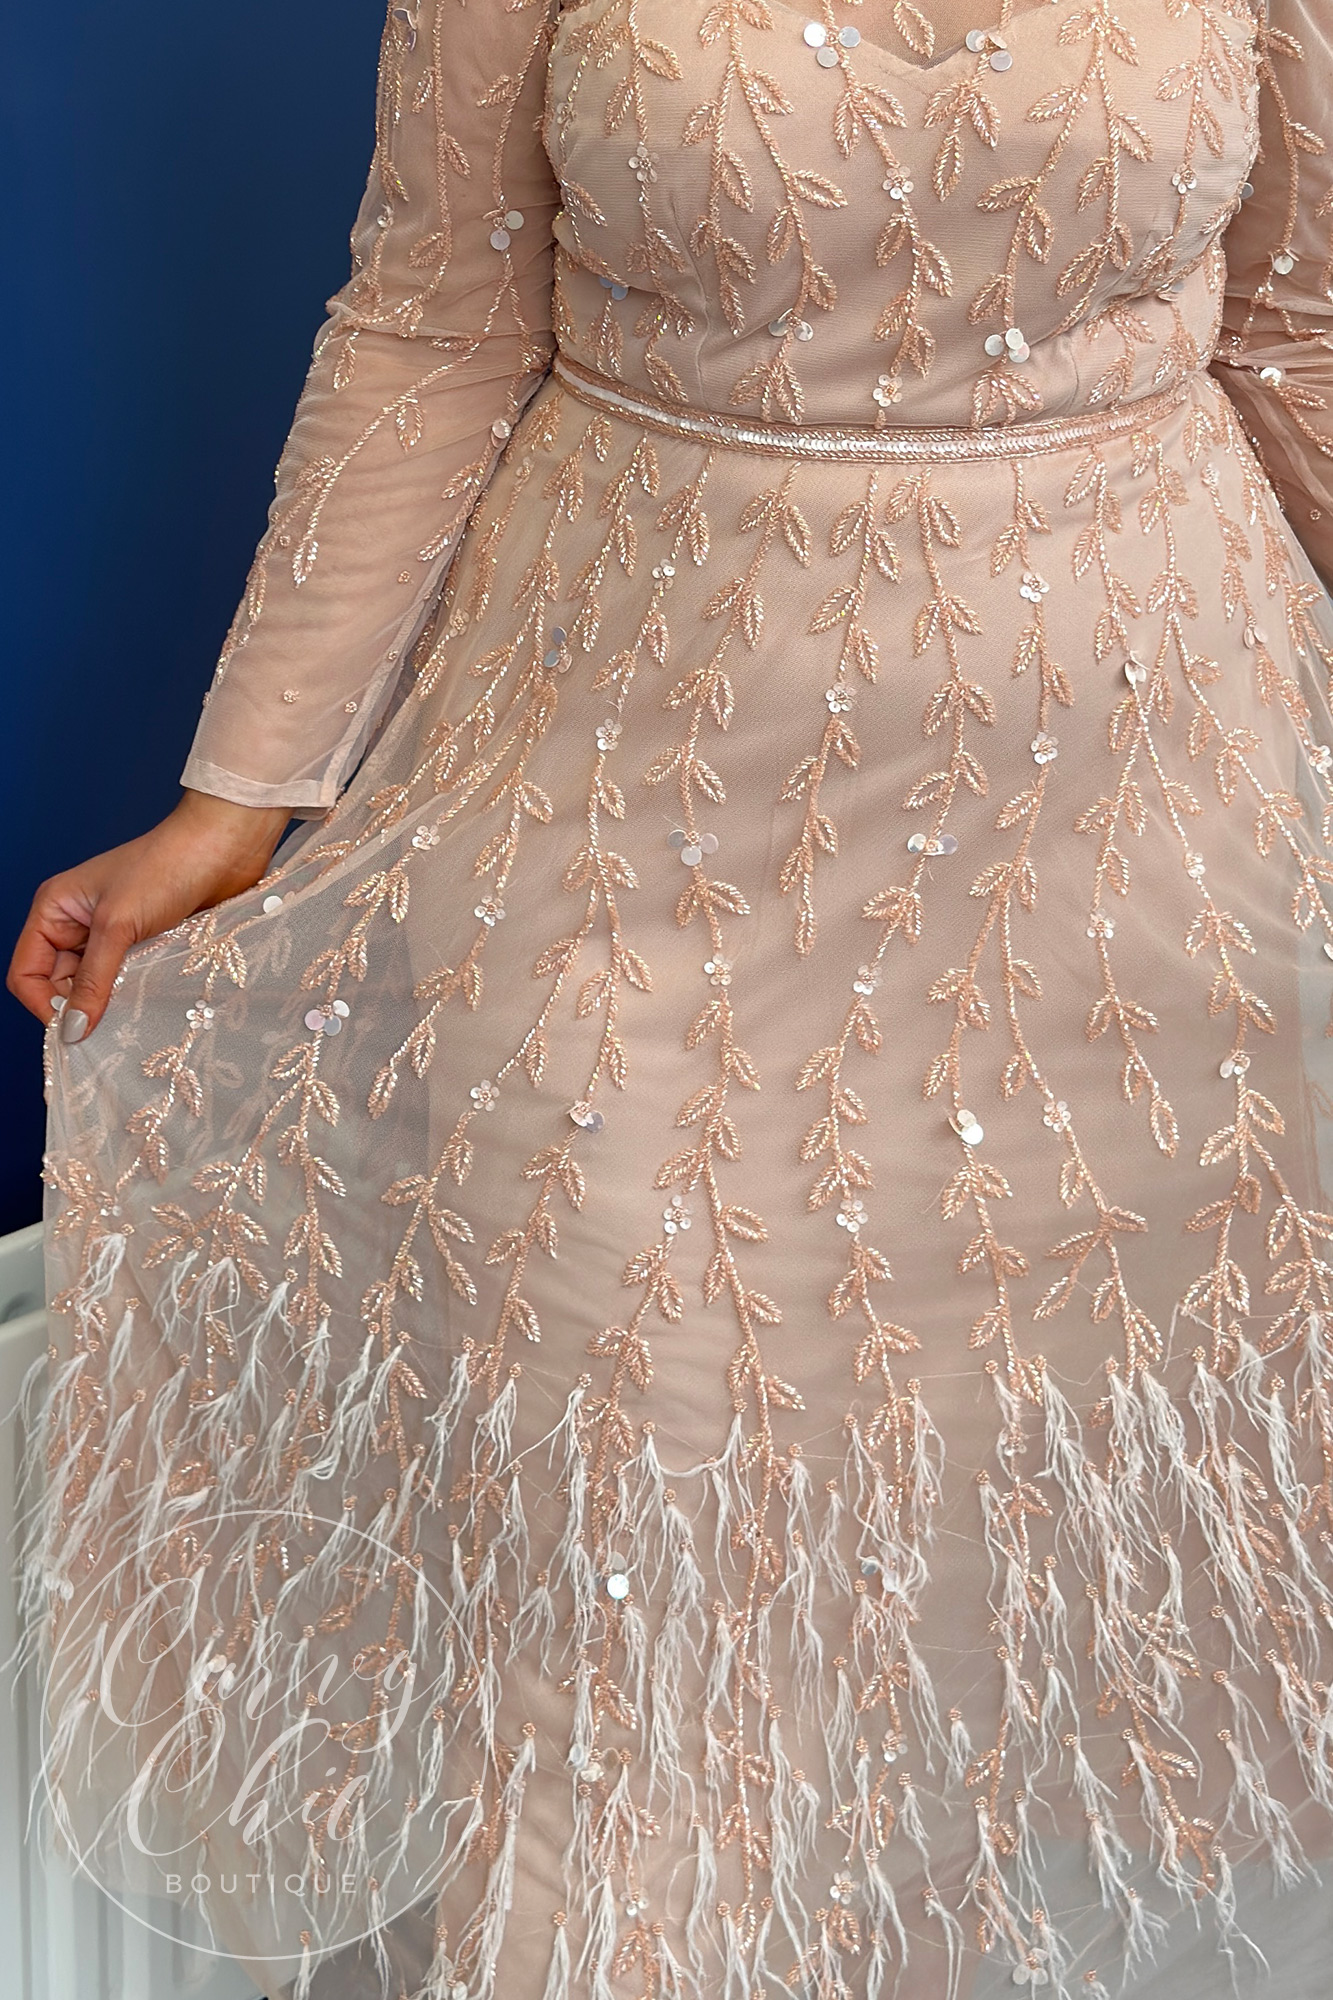 Blush Embellished Beaded Tulle Dress with Sleeves | 991919 closeup detail